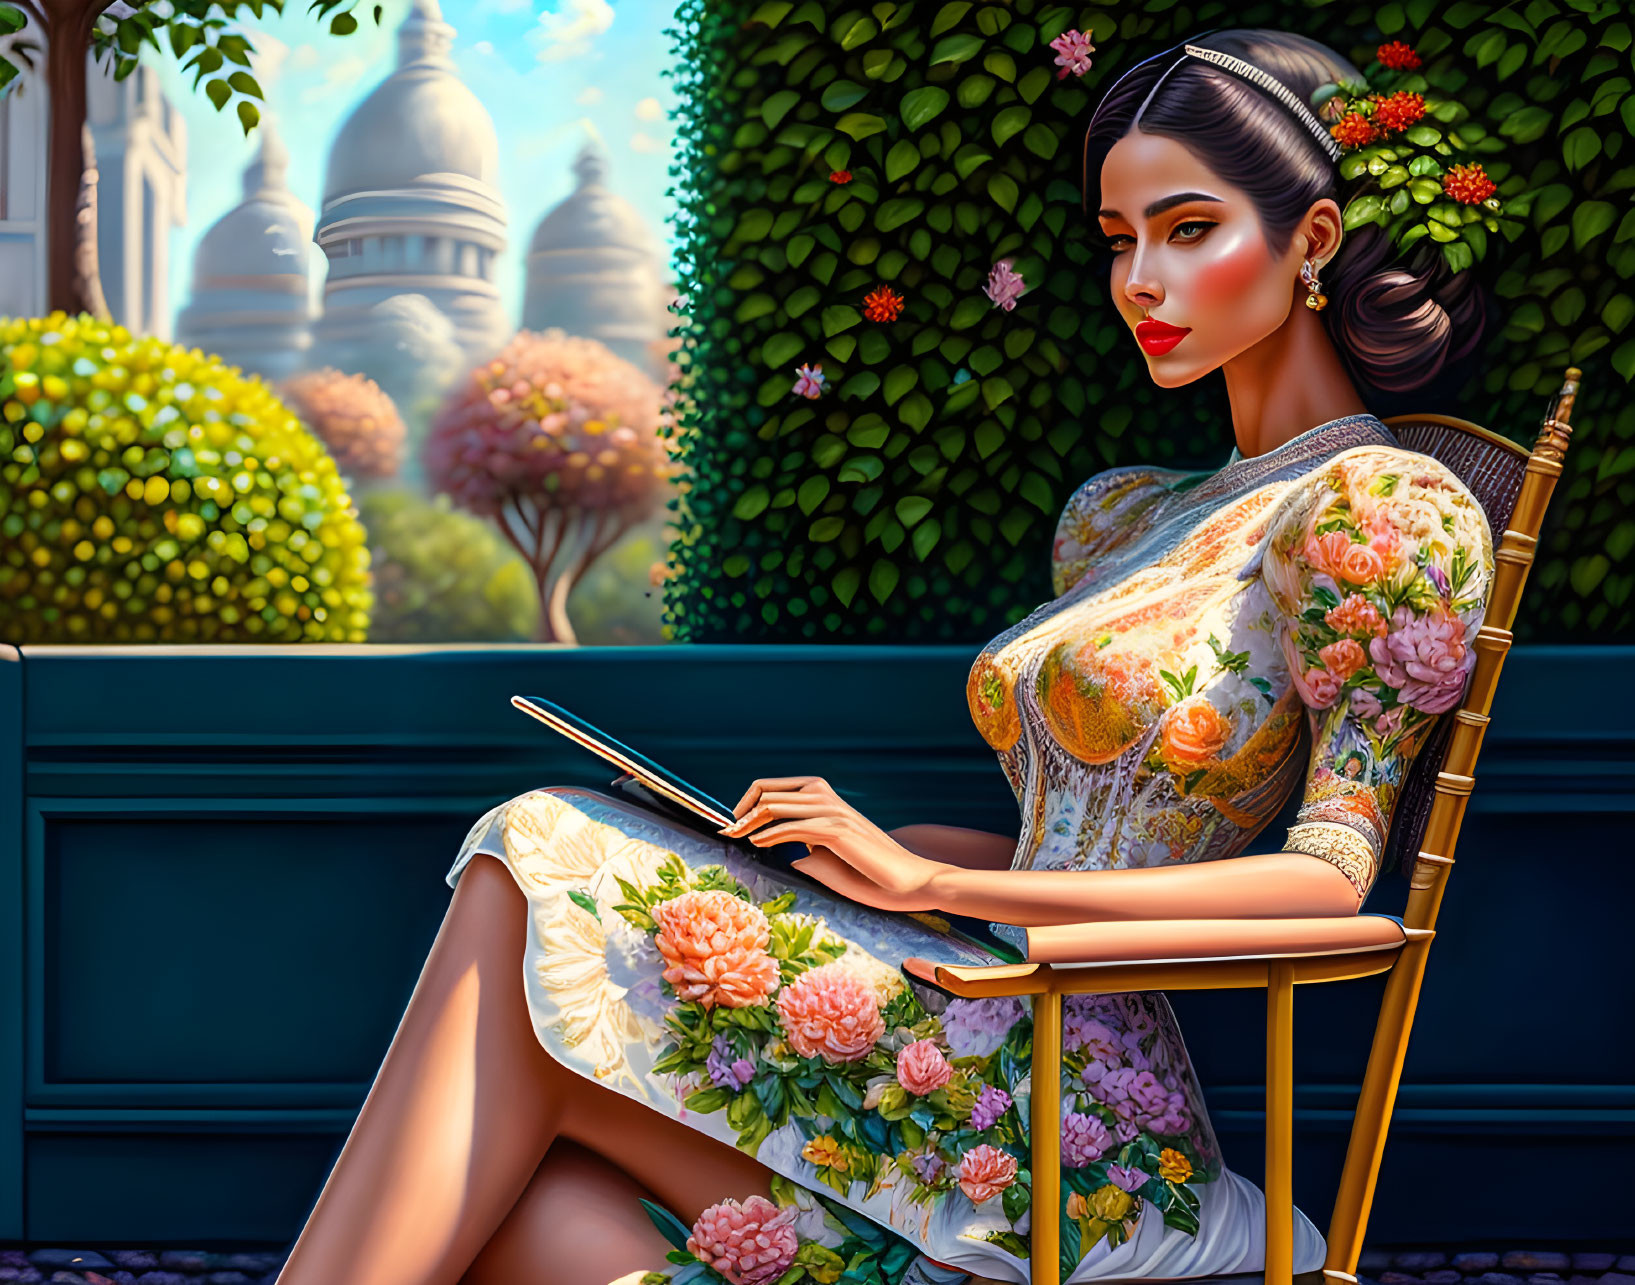 Woman in Floral Dress Reading Tablet Outdoors with Greenery and Architecture